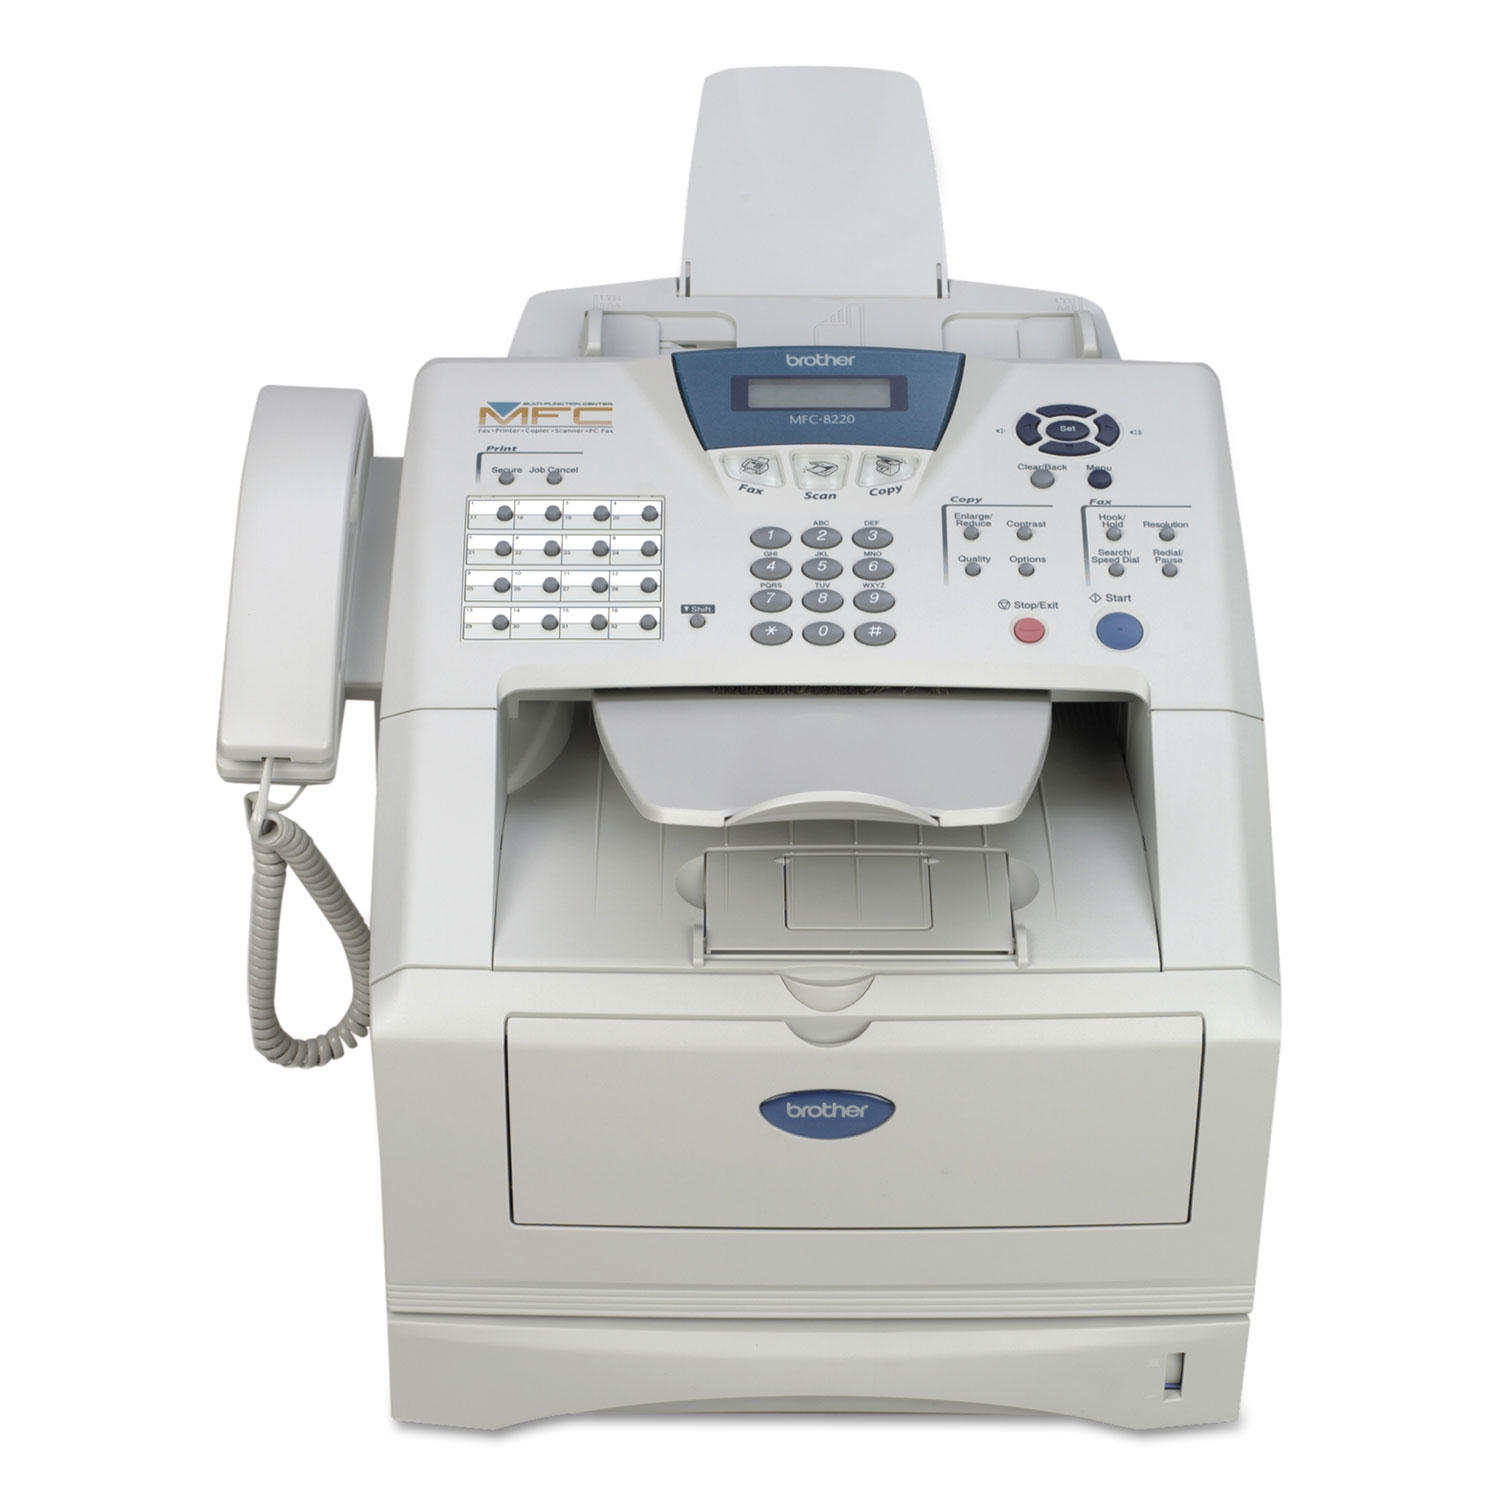  Brother MFC8220 MFC8220 Business Sheet-Fed Laser All-in-One Printer (BRTMFC8220) 